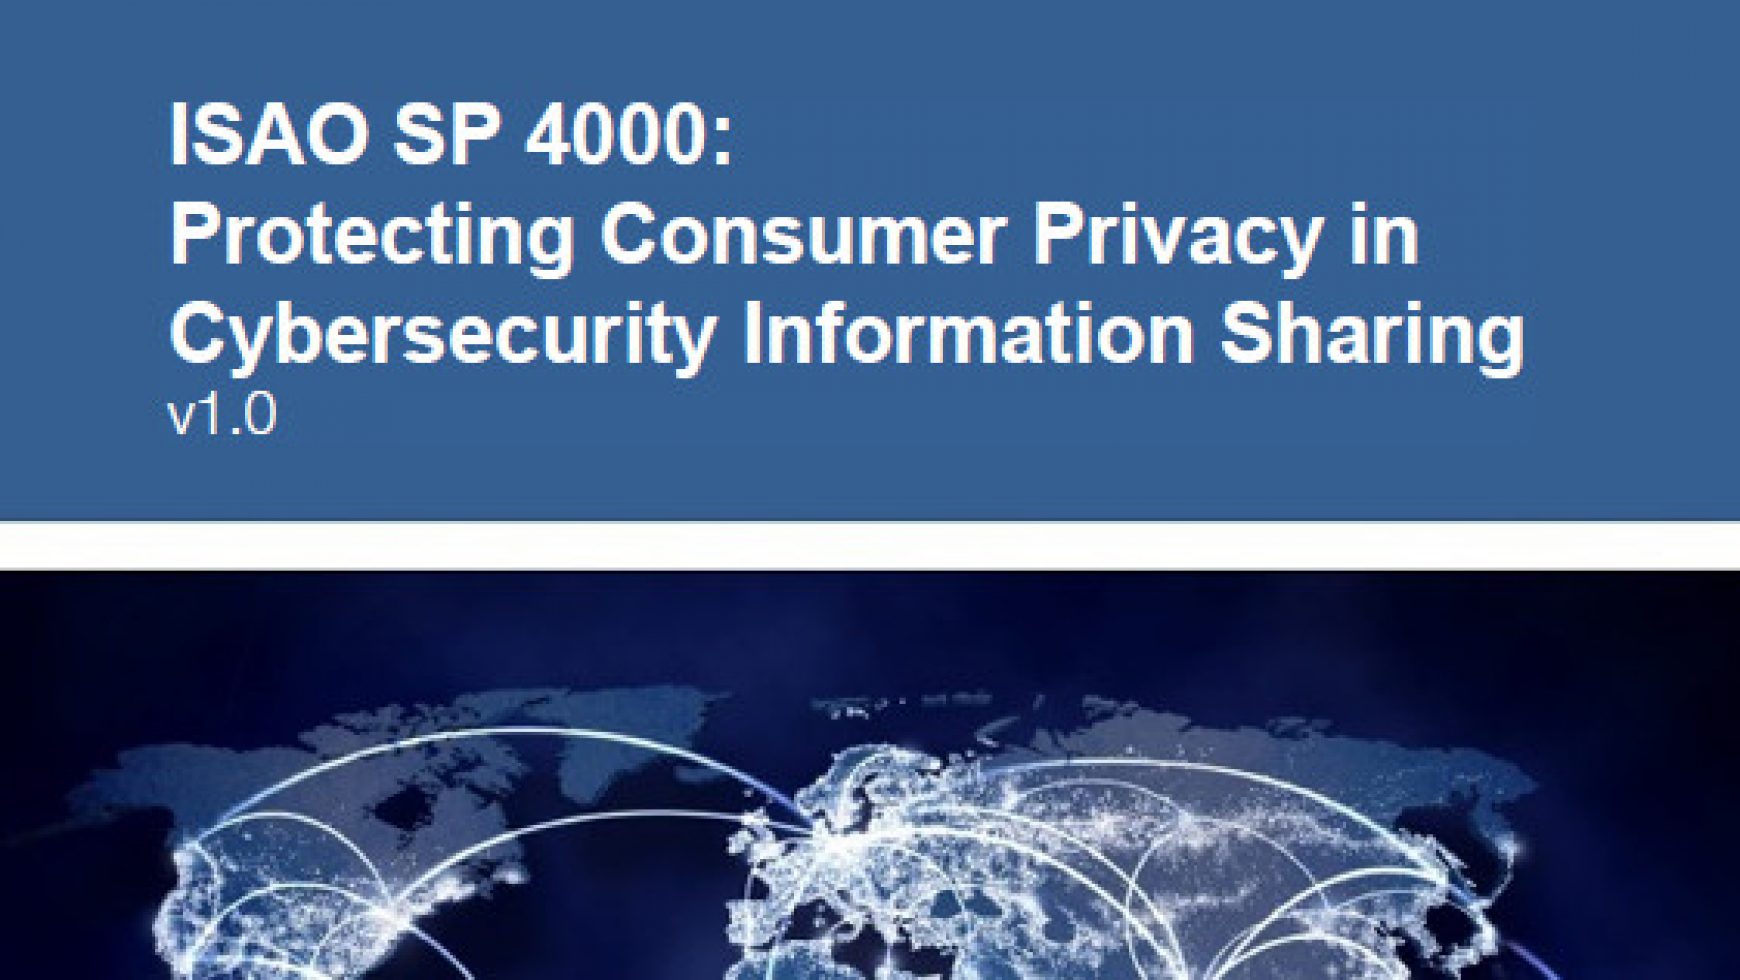 Protecting Consumer Privacy in Cybersecurity Information Sharing